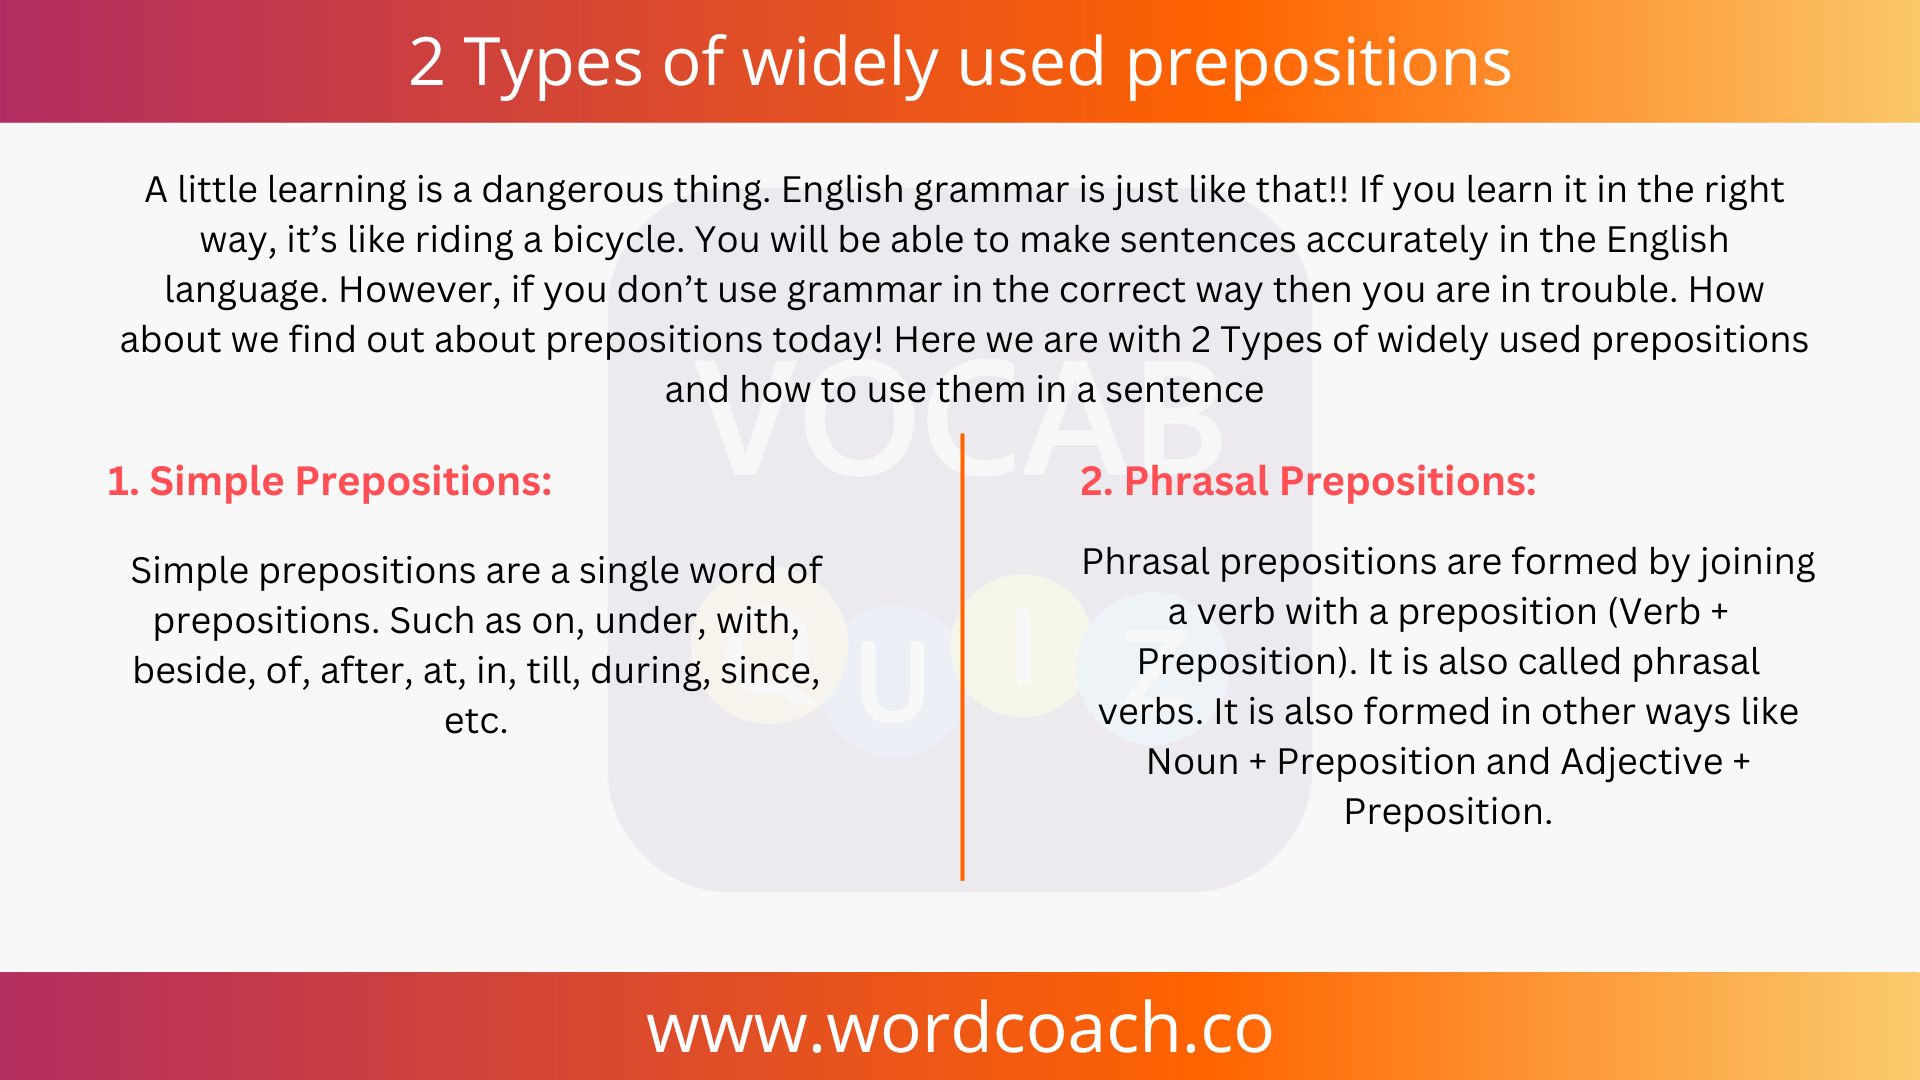 2 Types of widely used prepositions